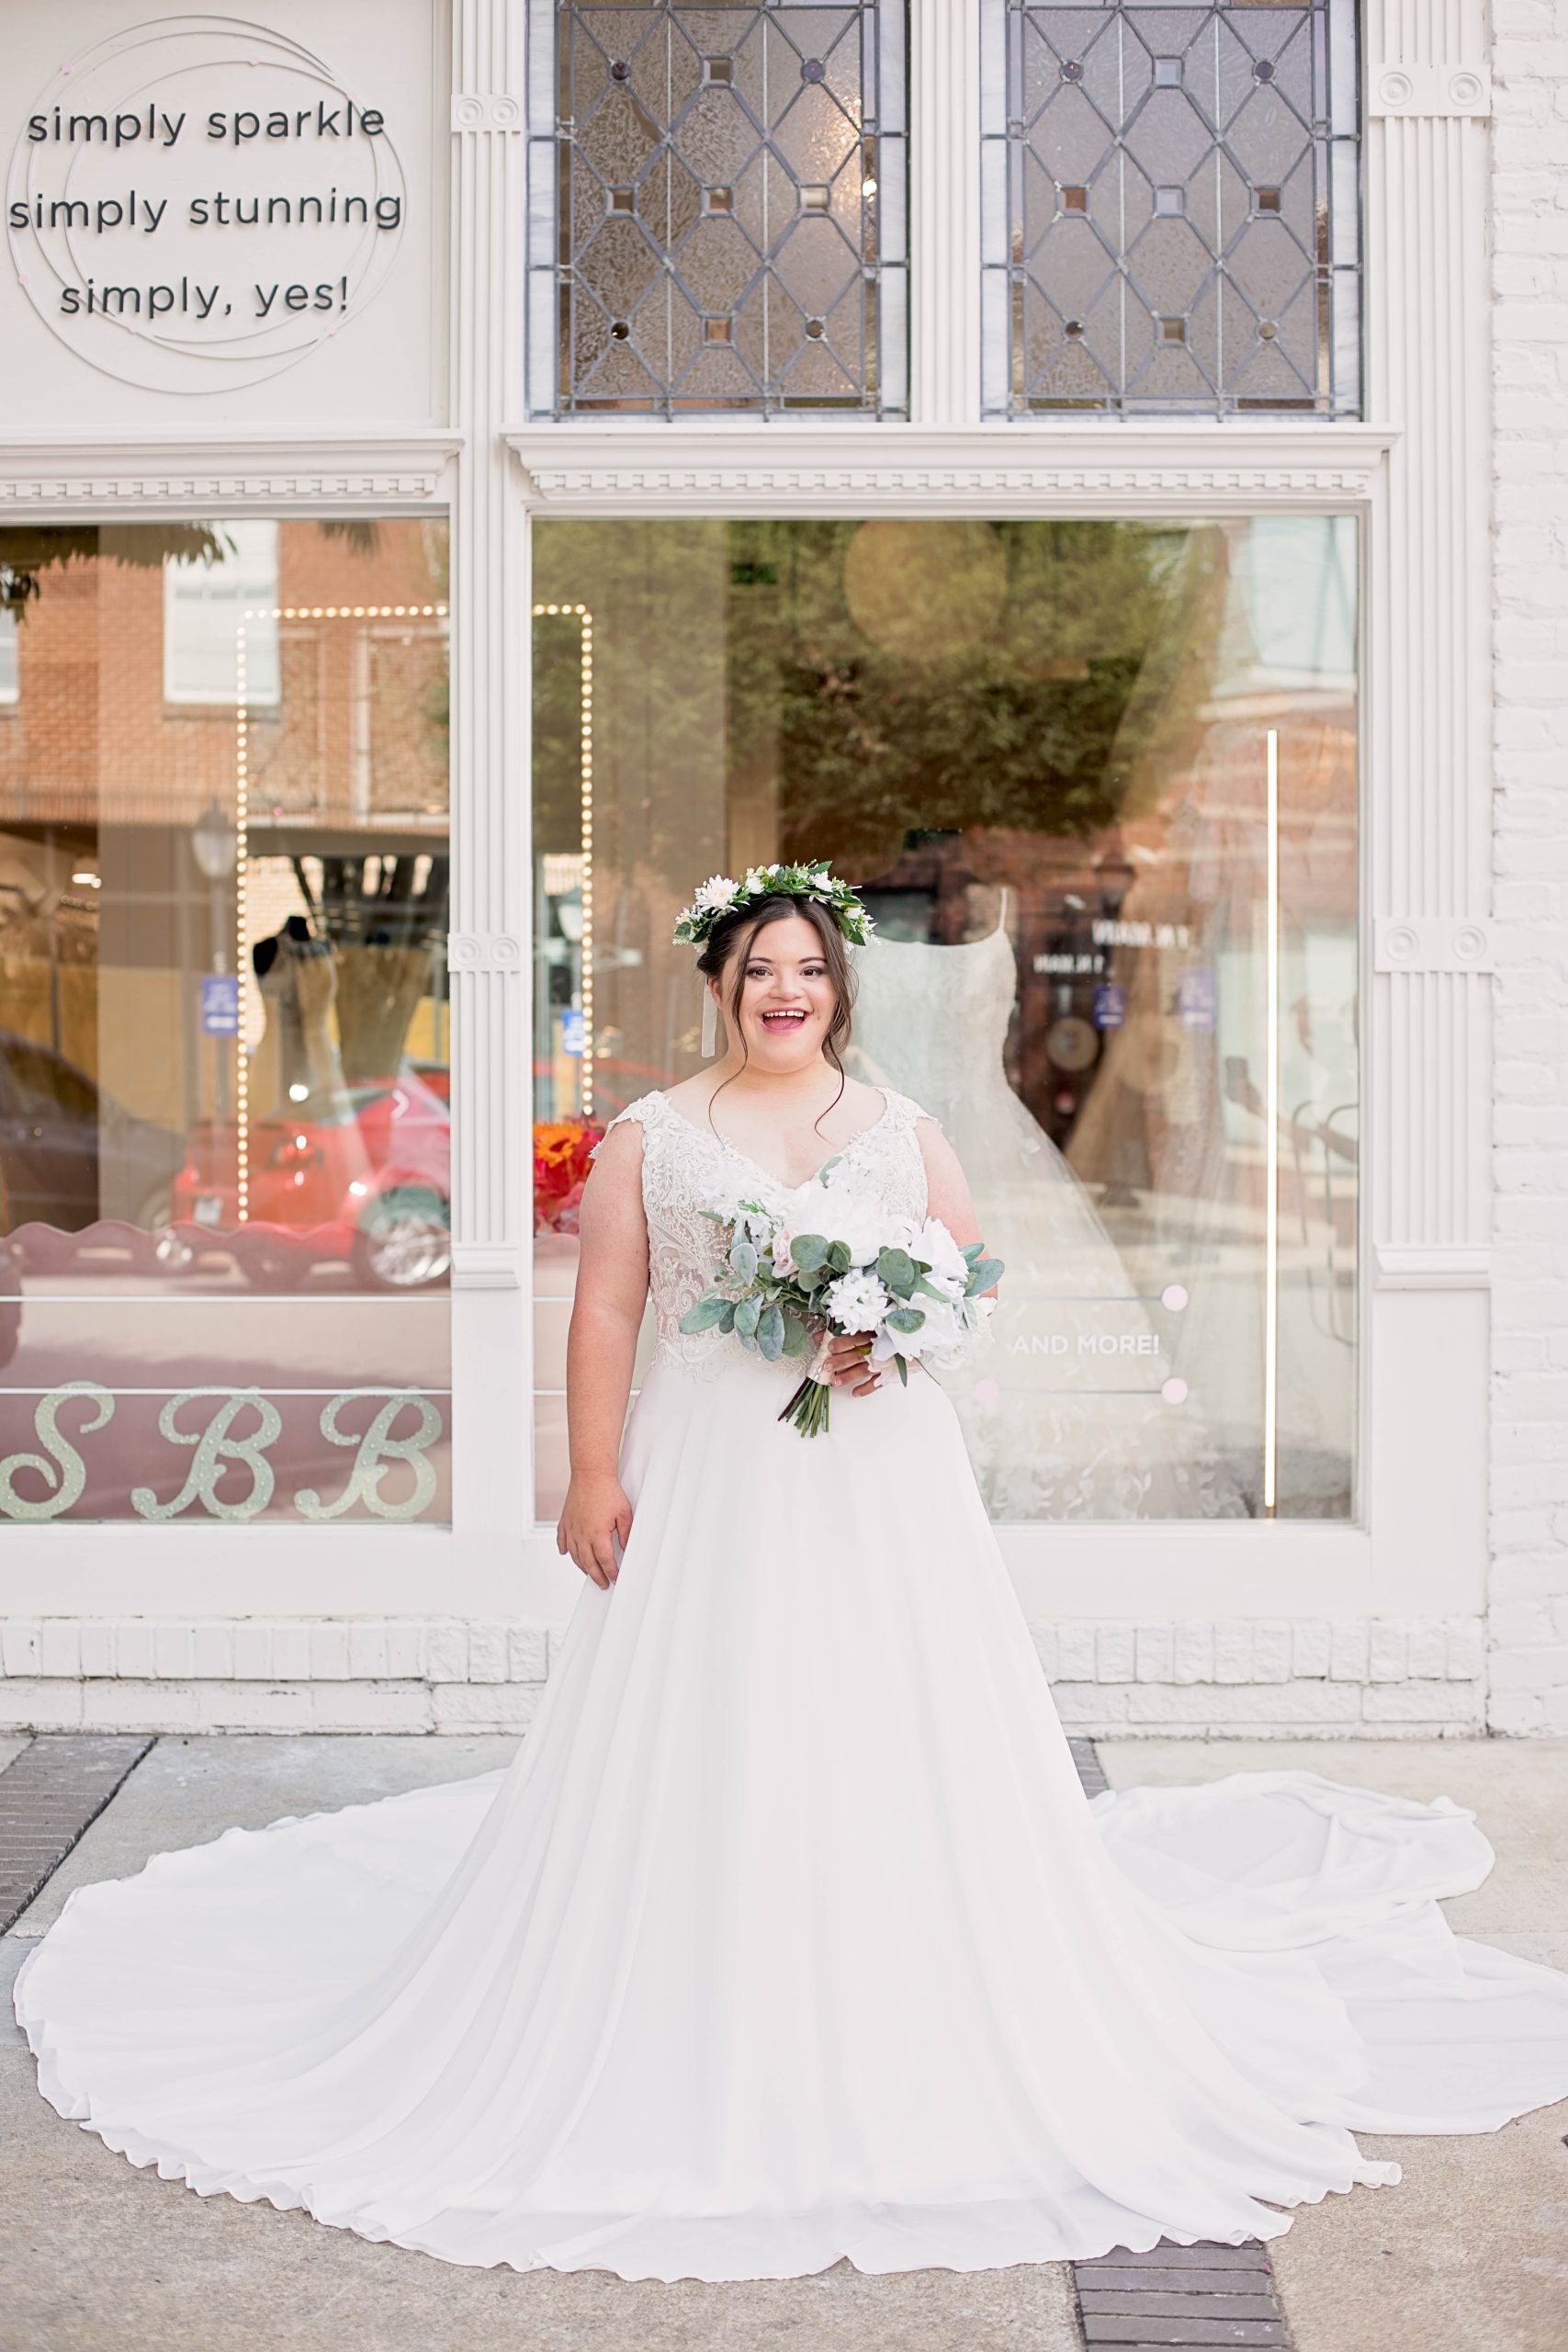 Bride With Down Syndrome Wearing Chiffon Wedding Dress Called Lorraine By Maggie Sottero For All Bodies All Brides 